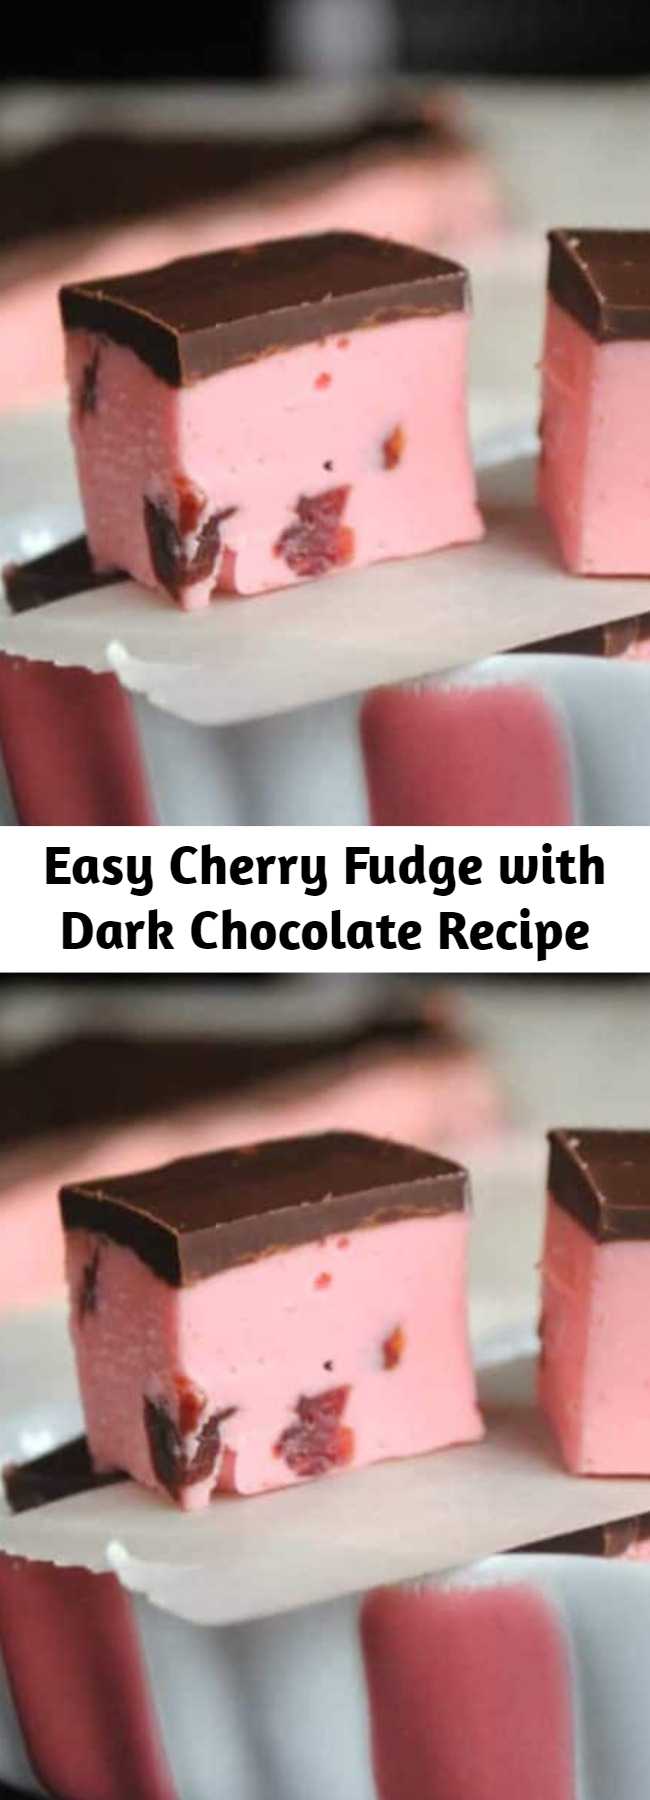 Easy Cherry Fudge with Dark Chocolate Recipe - The search for the best ever Cherry Fudge recipe is over! Nothing says “I love you” like giving someone a plate of homemade fudge, especially when it’s packed with real cherries and topped with silky dark chocolate.